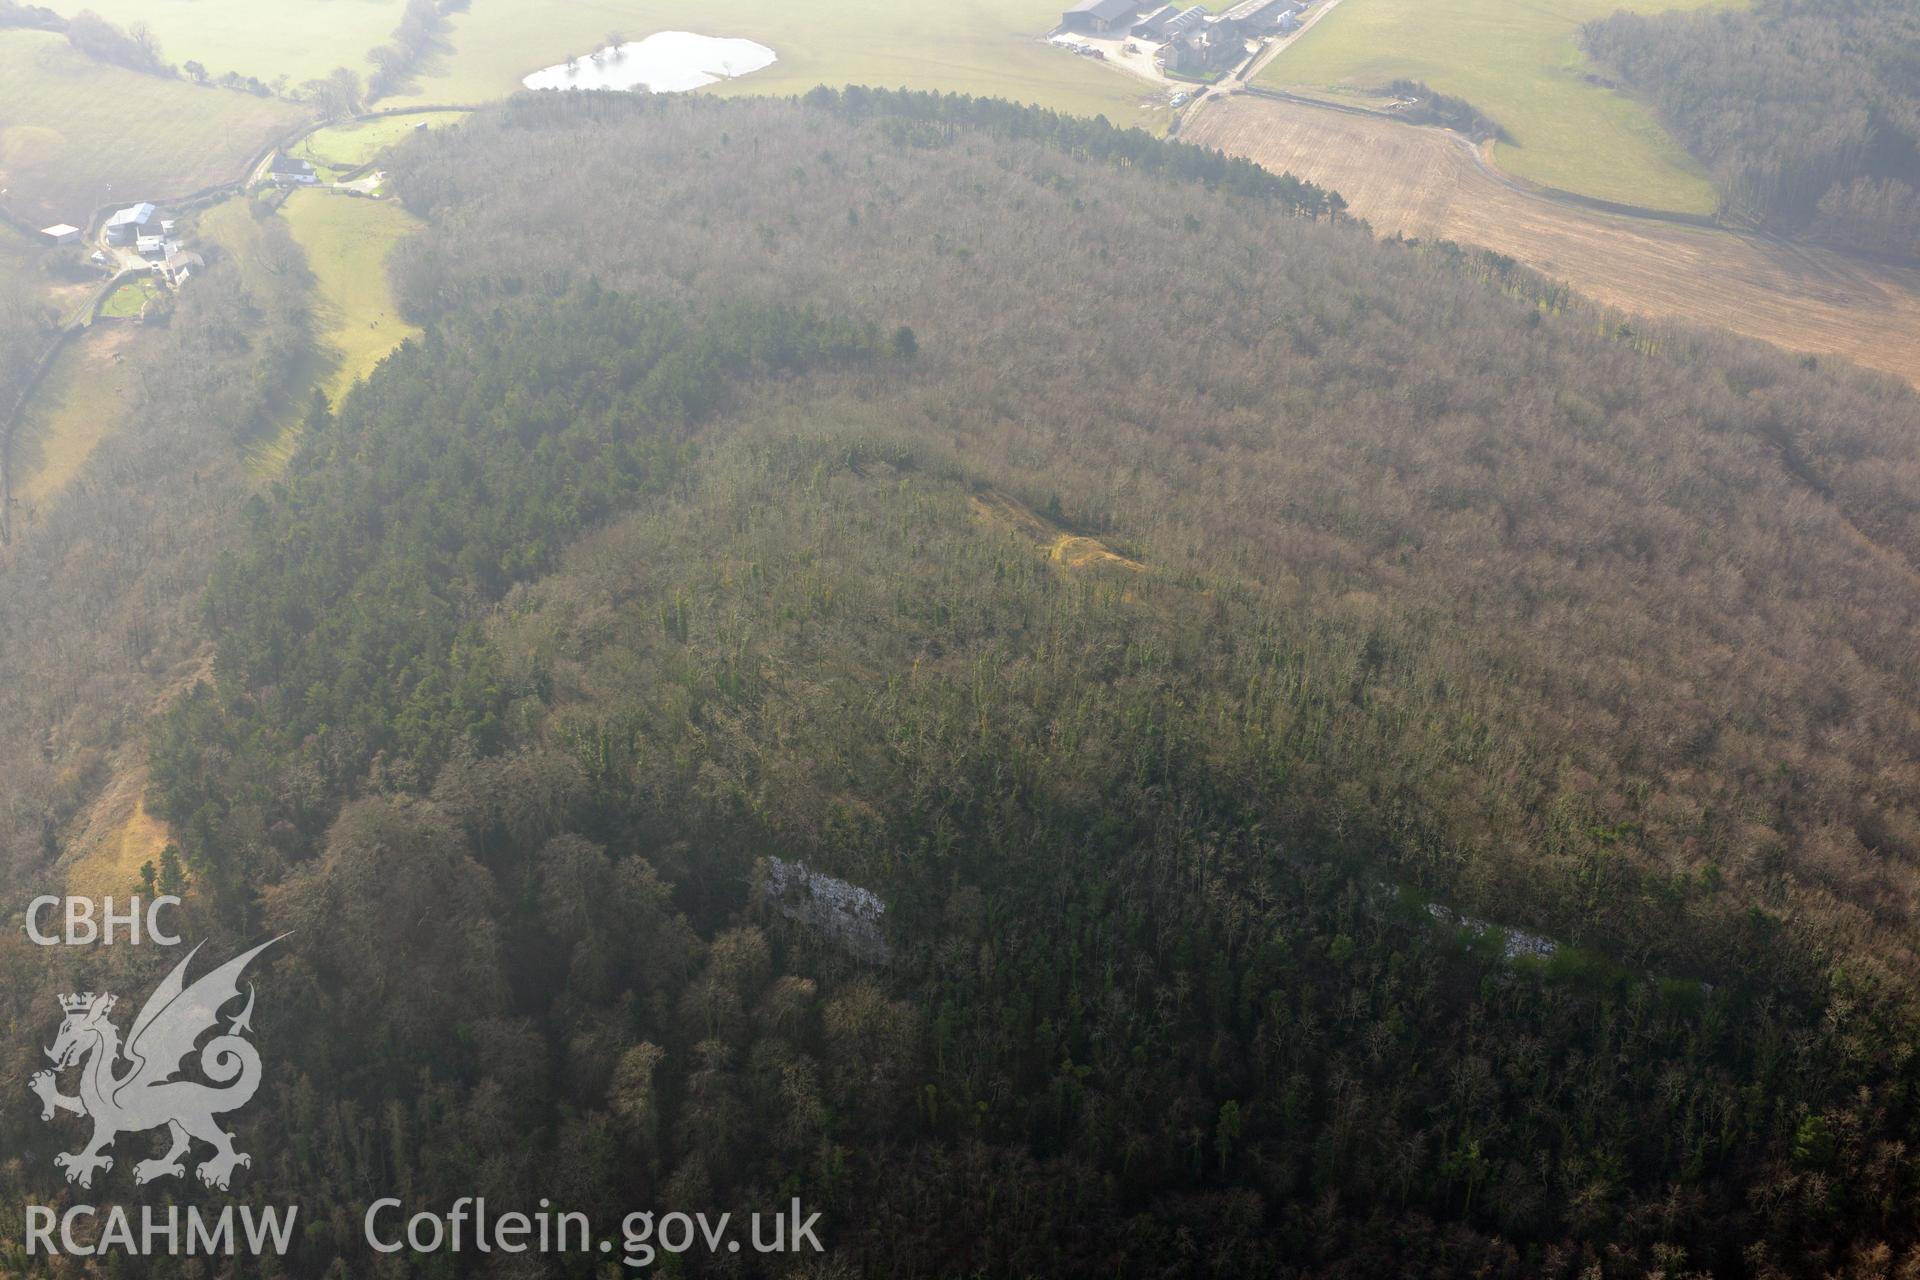 Castell Cawr hillfort, on the south western outskirts of Abergele. Oblique aerial photograph taken during the Royal Commission?s programme of archaeological aerial reconnaissance by Toby Driver on 28th February 2013.